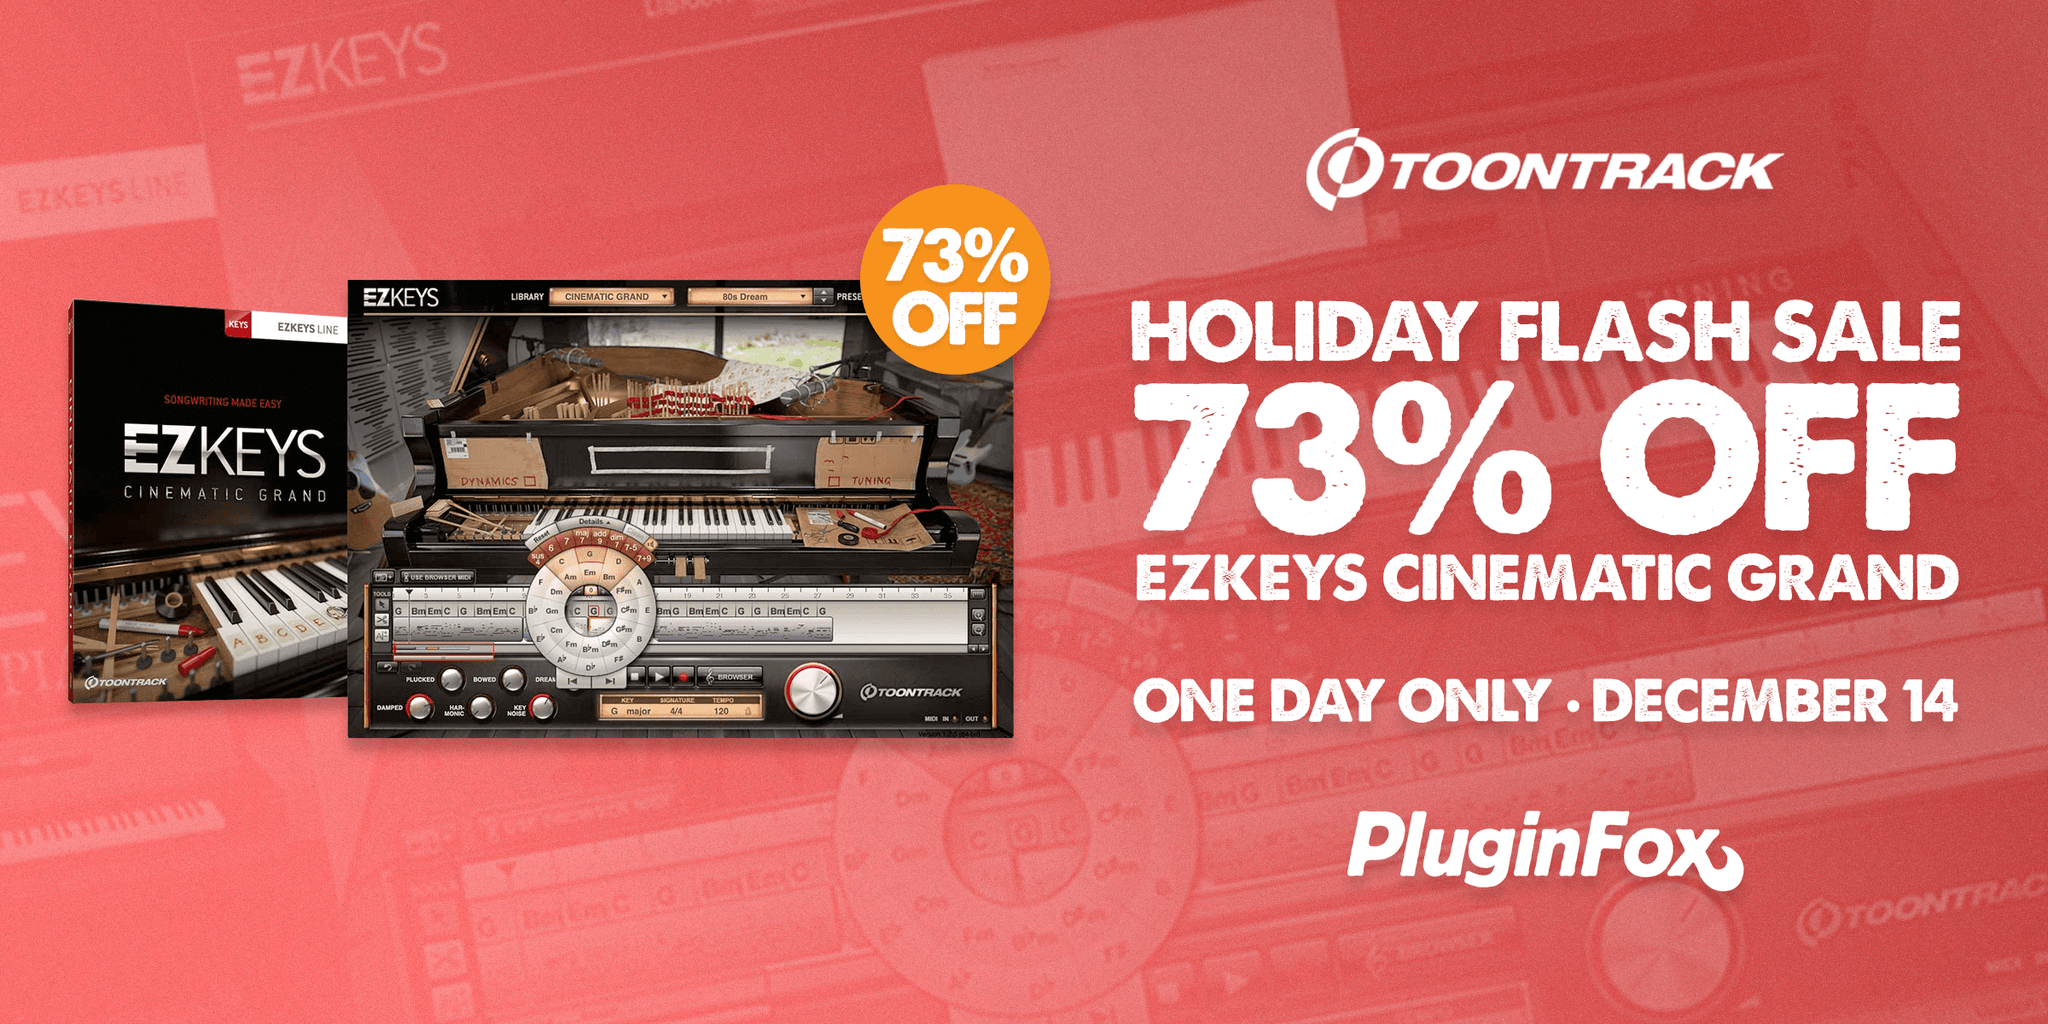 Toontrack Holiday Flash Sale - December 14th